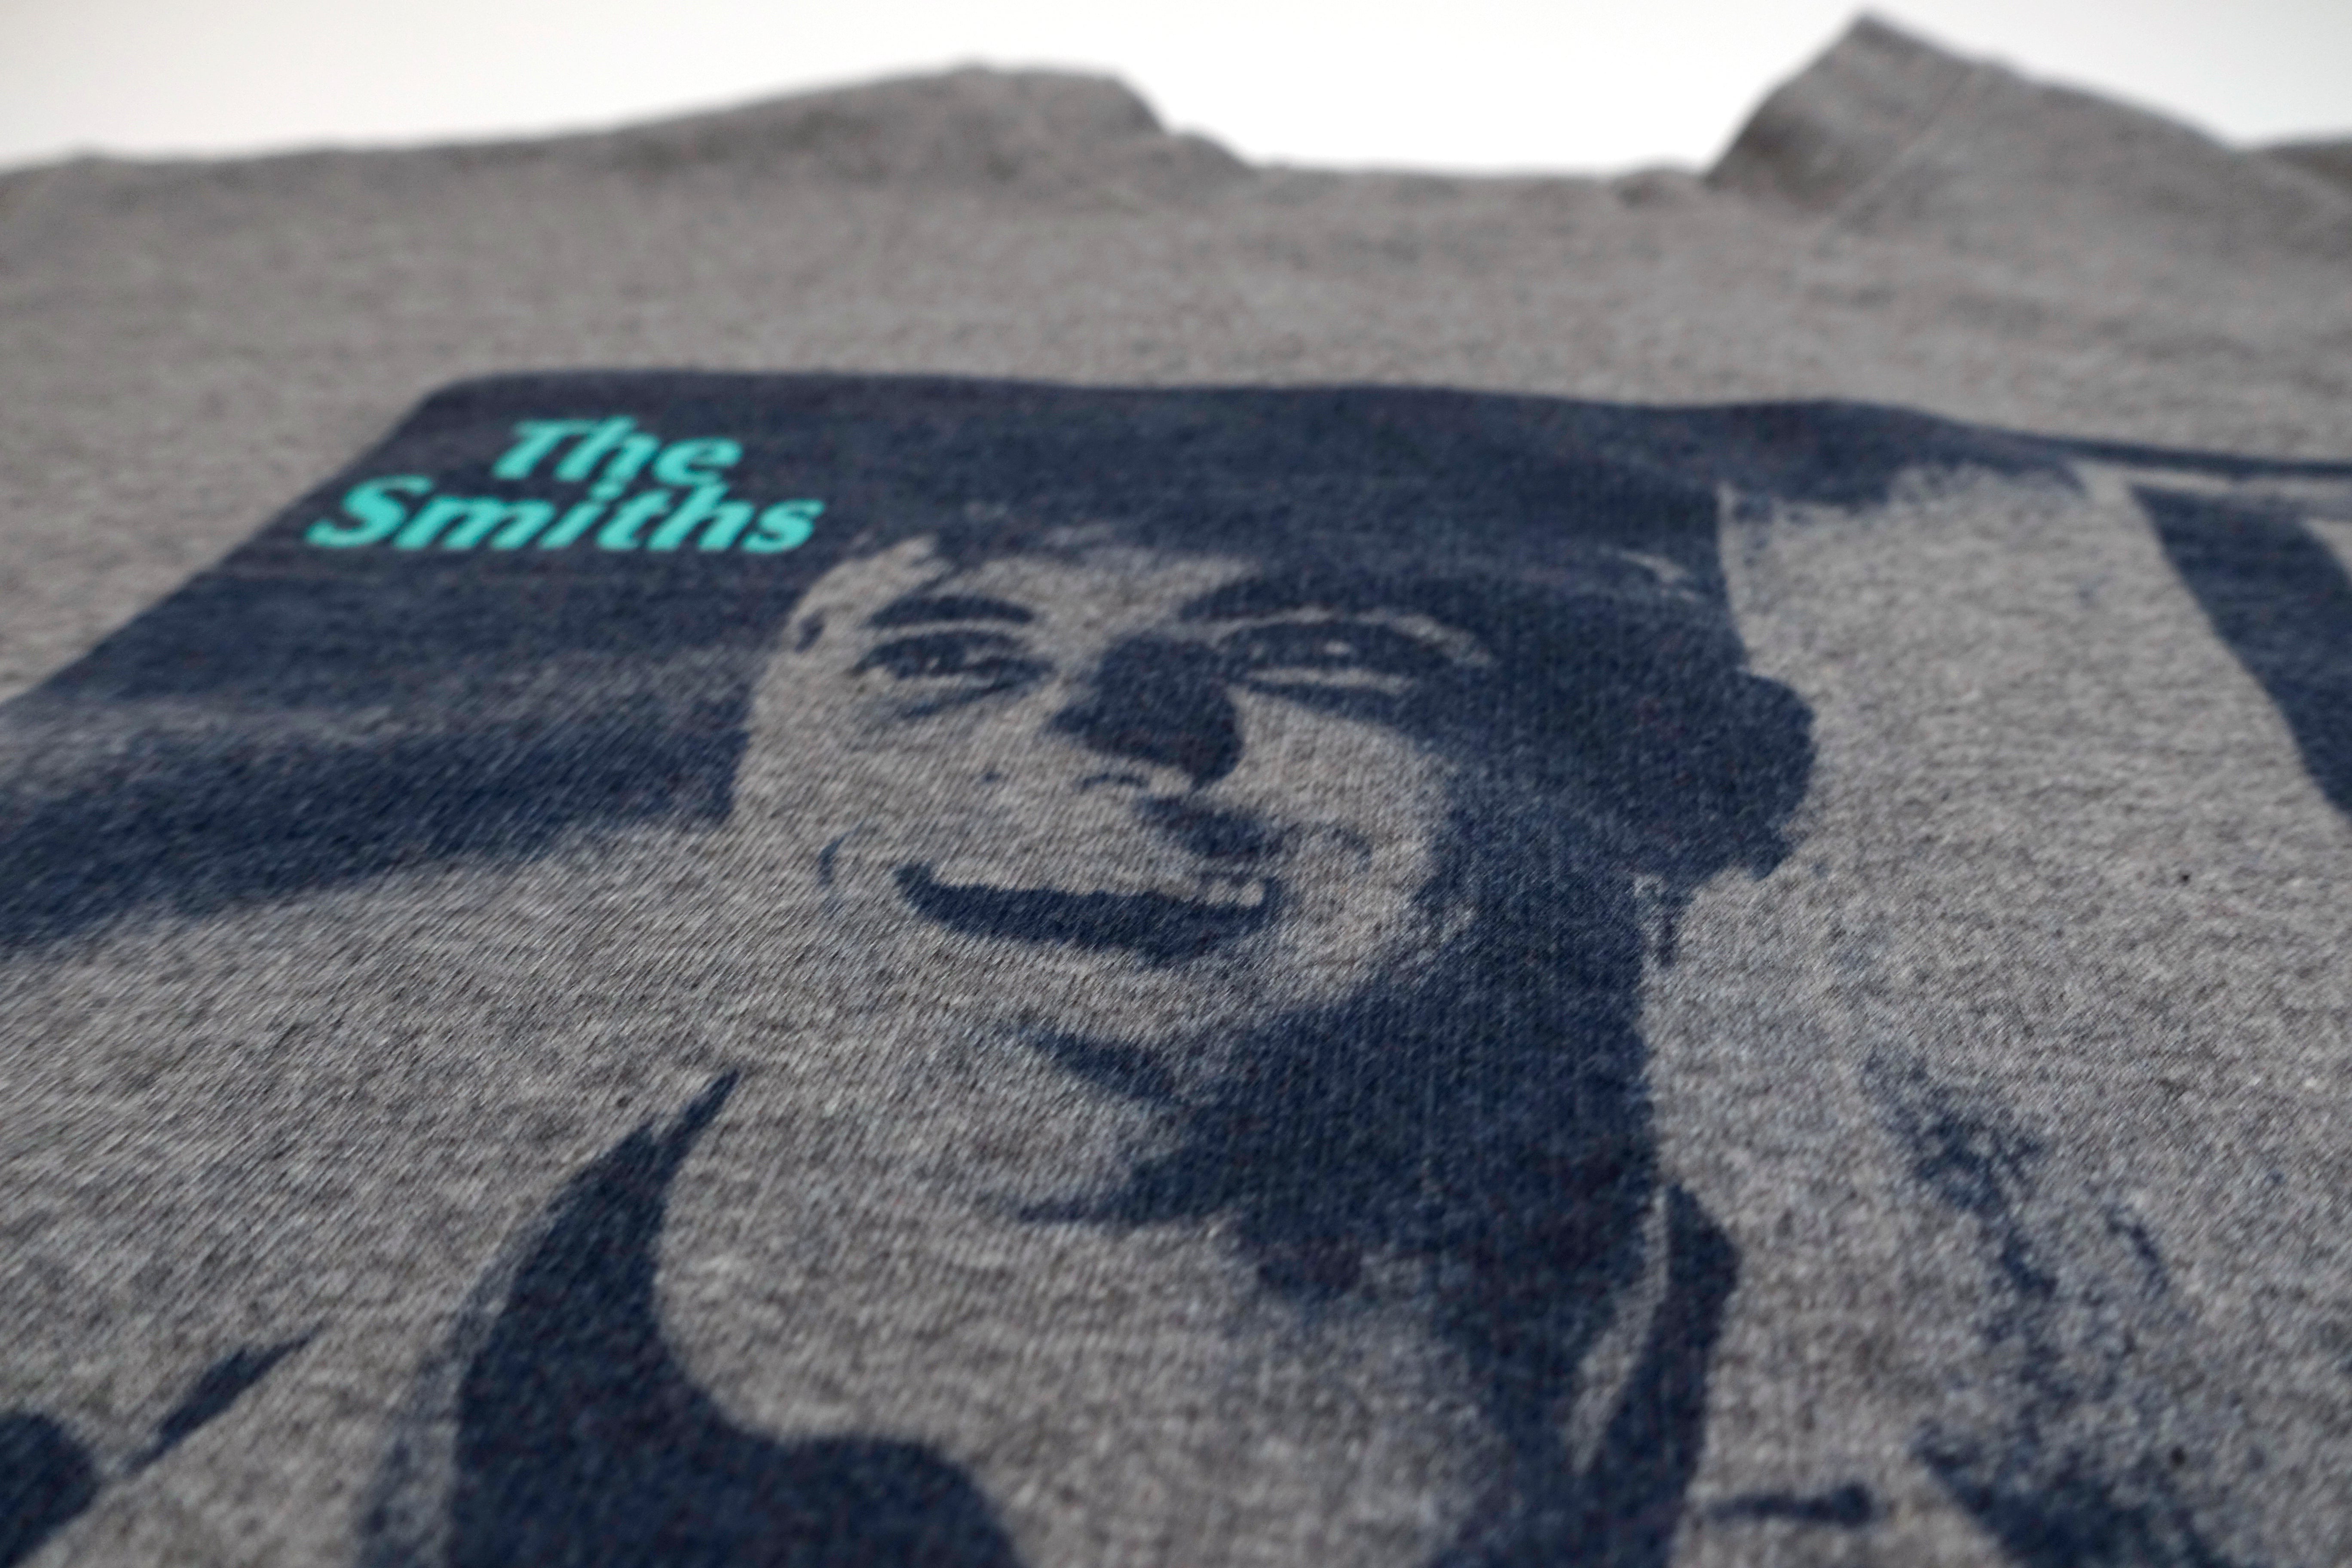 the Smiths - What Difference Does It Make? Grey Sweat Shirt (Bootleg by Me) Size XL